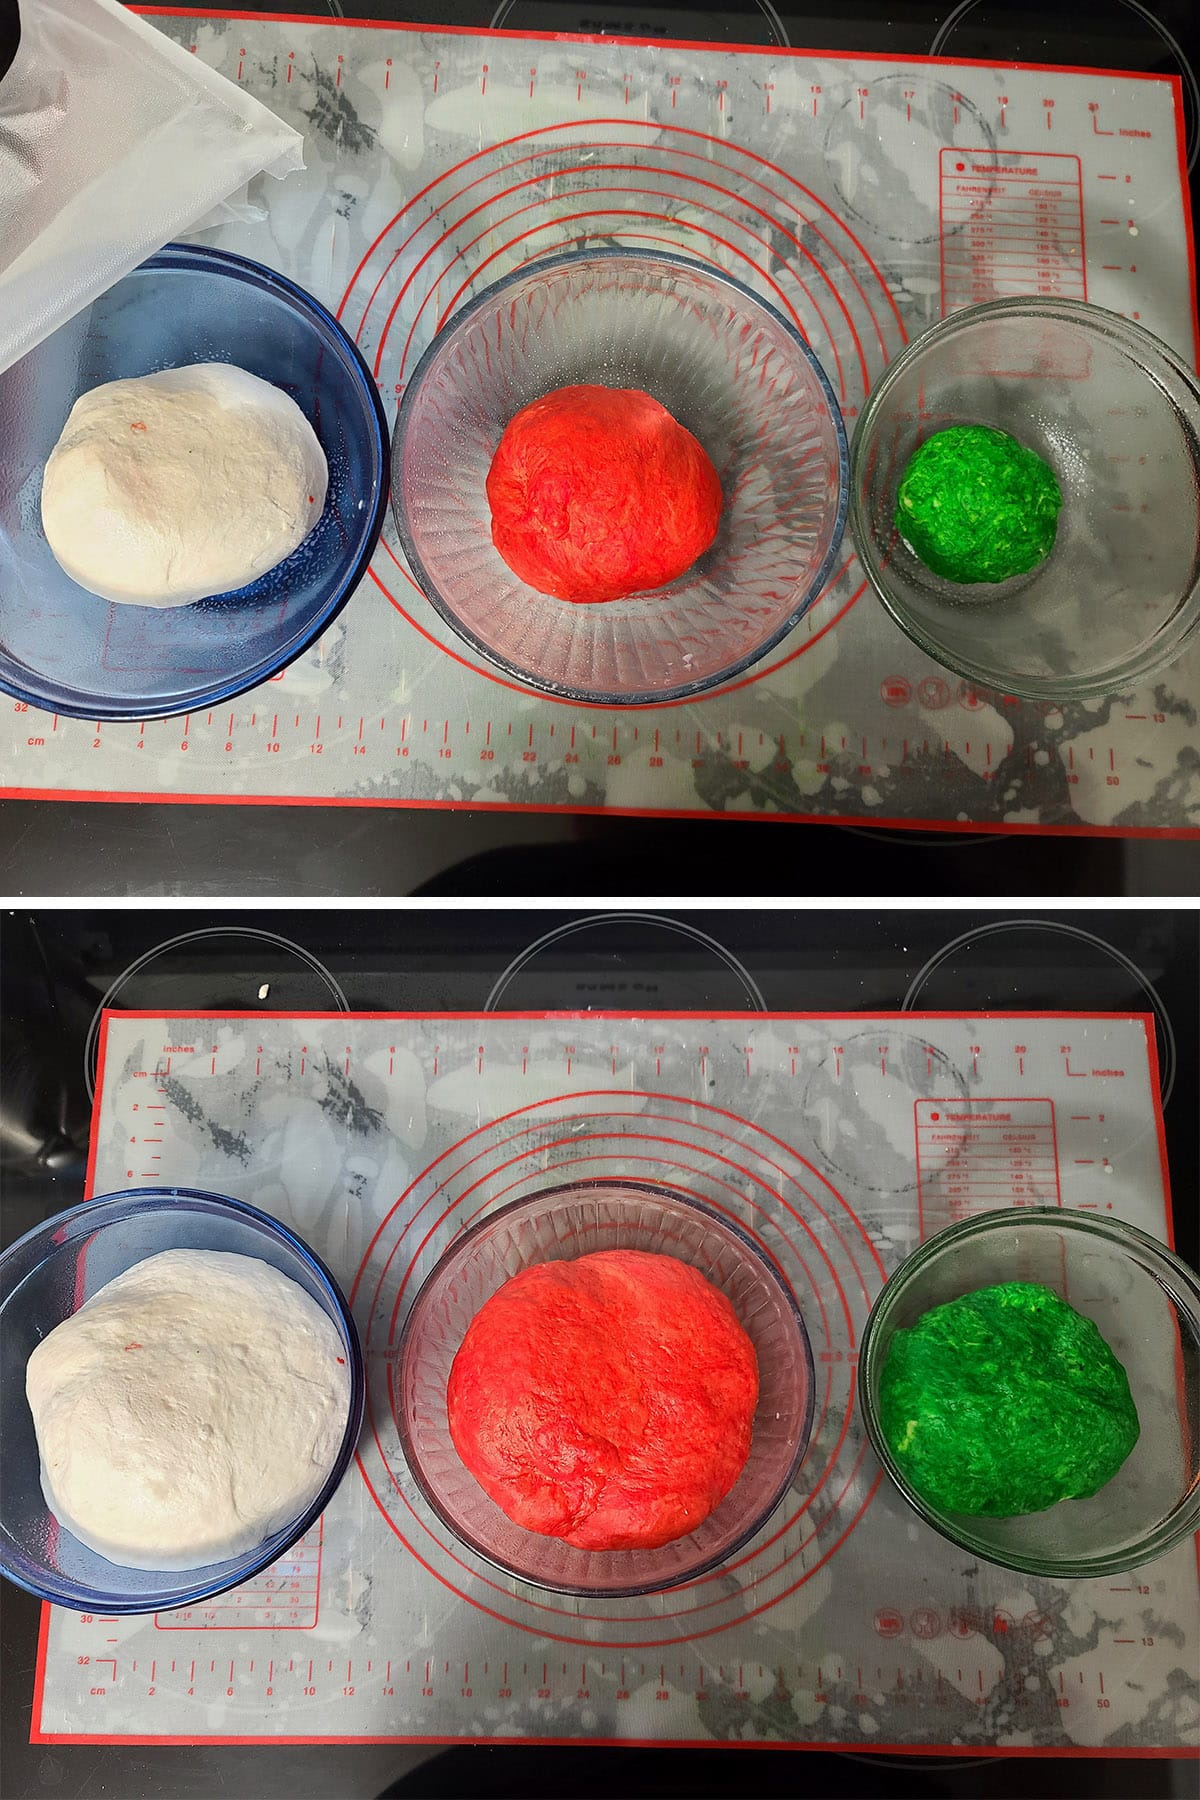 A 2 part image showing bowls of white, red, and green dough, before and after rising,